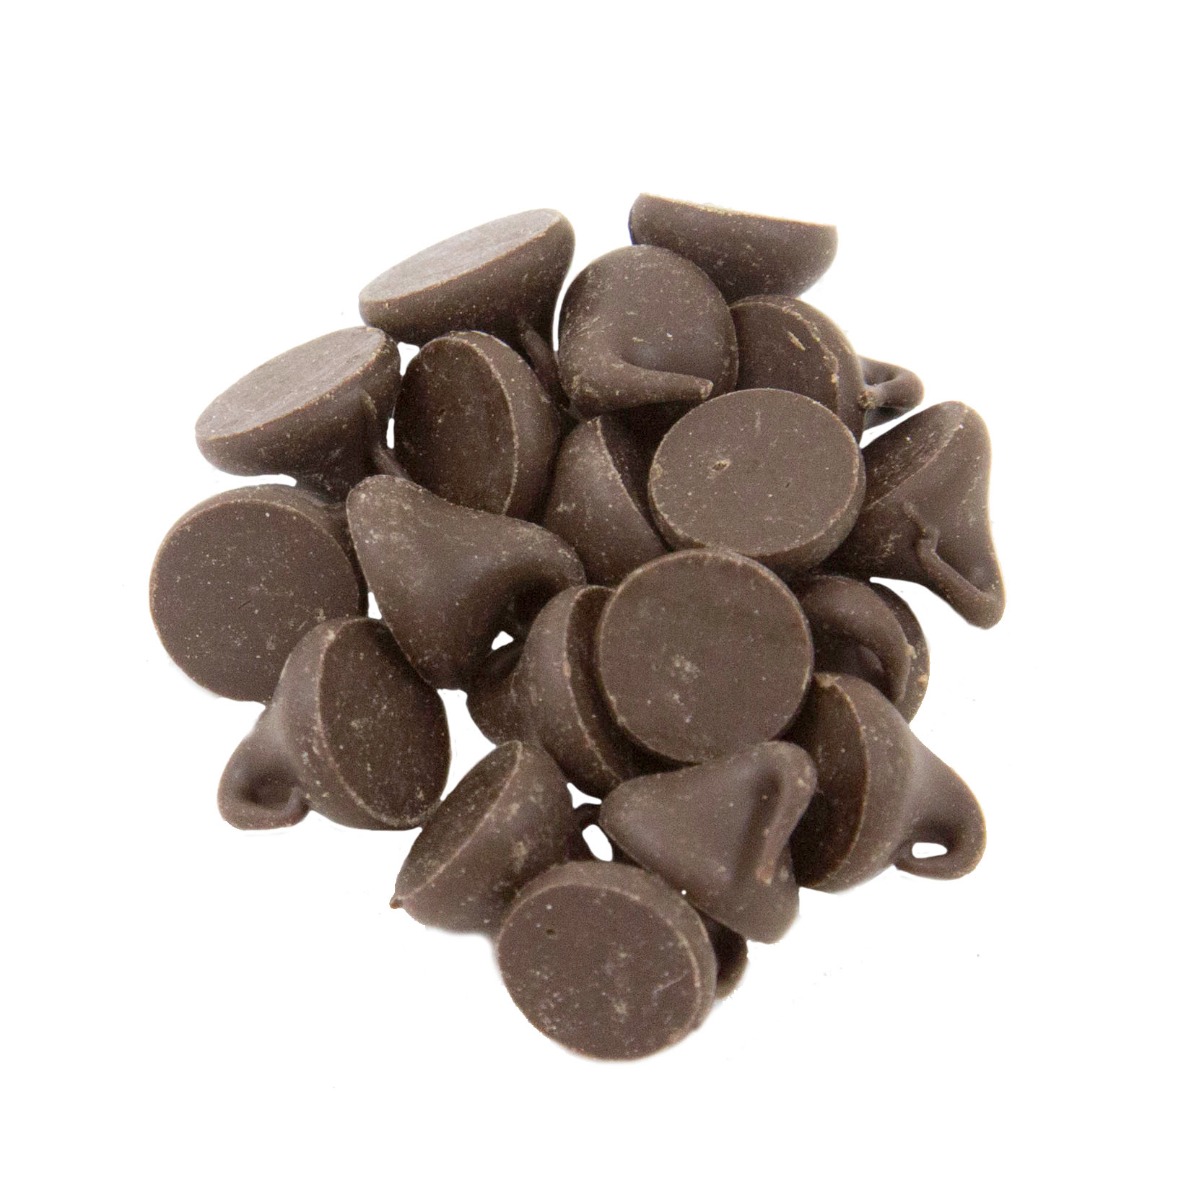 Real • Organic Chocolate Chips -919